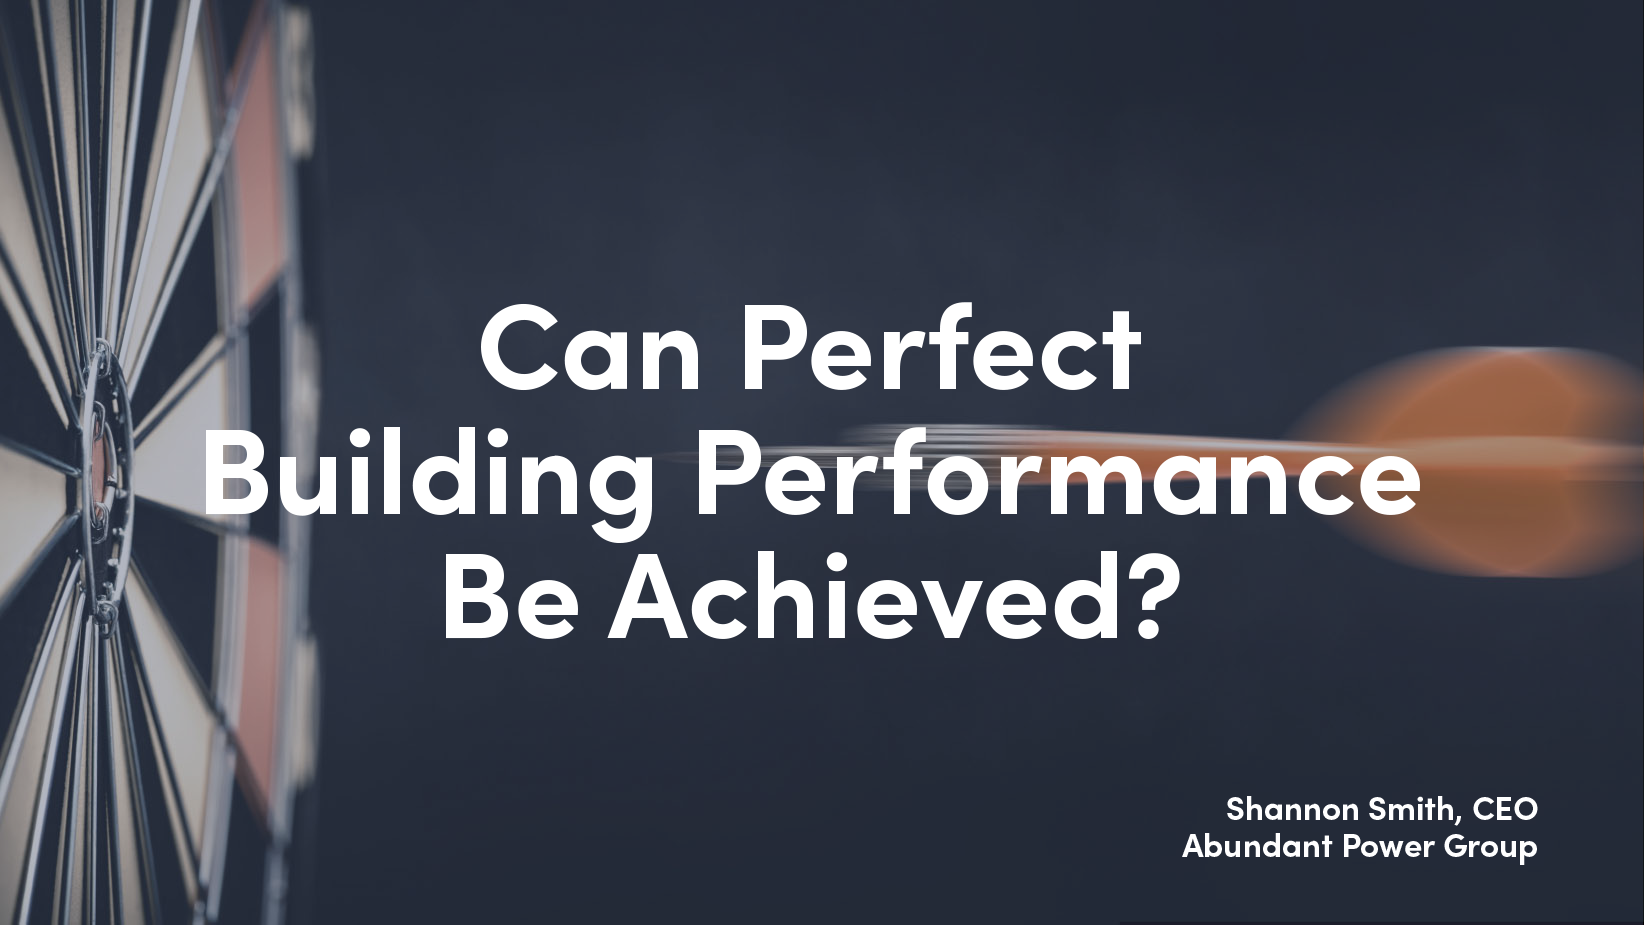 Can Perfect Building Performance Be Achieved?